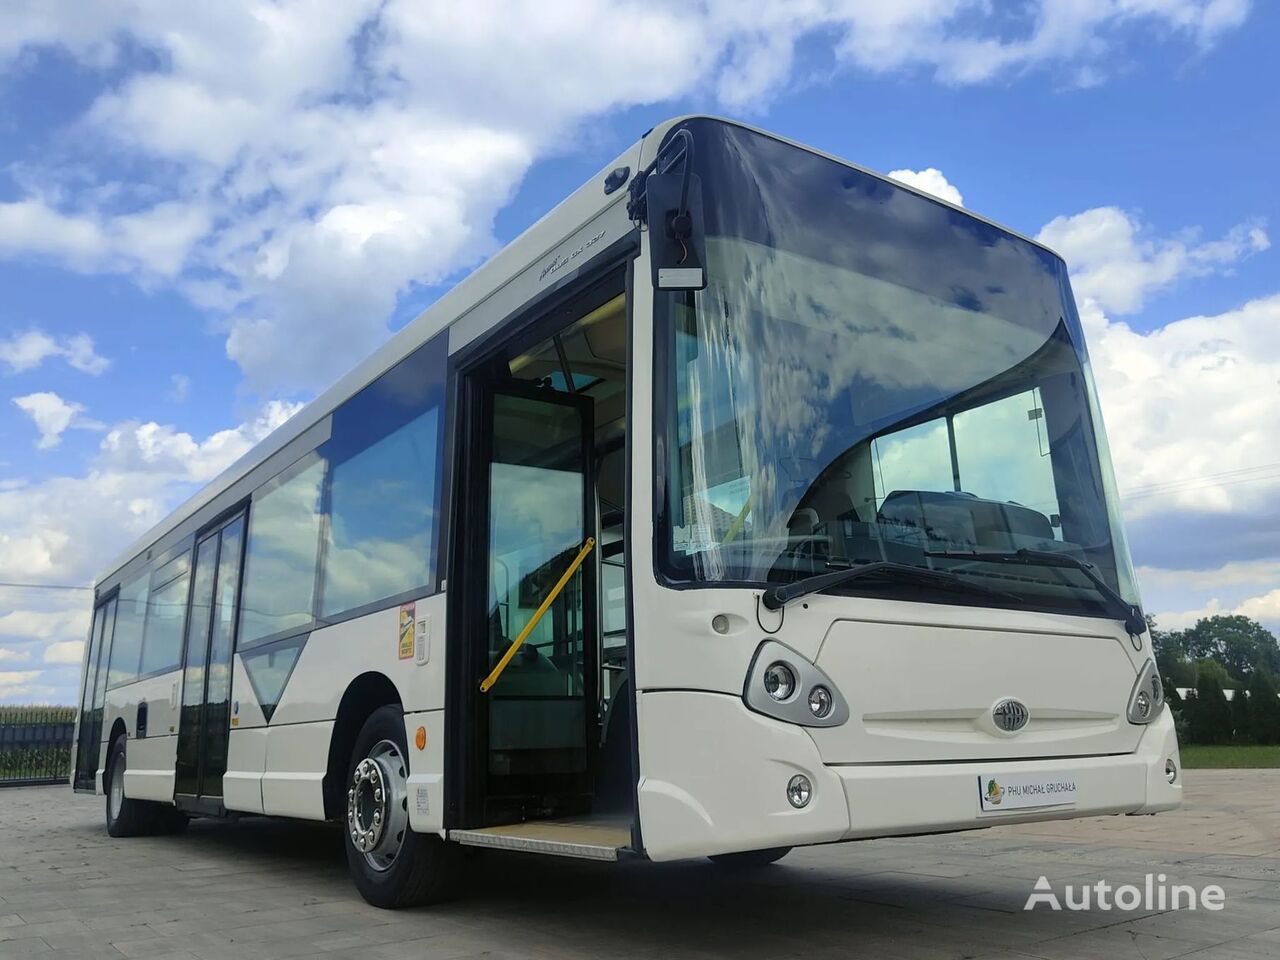 linnabuss HeuliezBus GX 327 KM ONLY HALF milion - FULL service from new ! perfect con